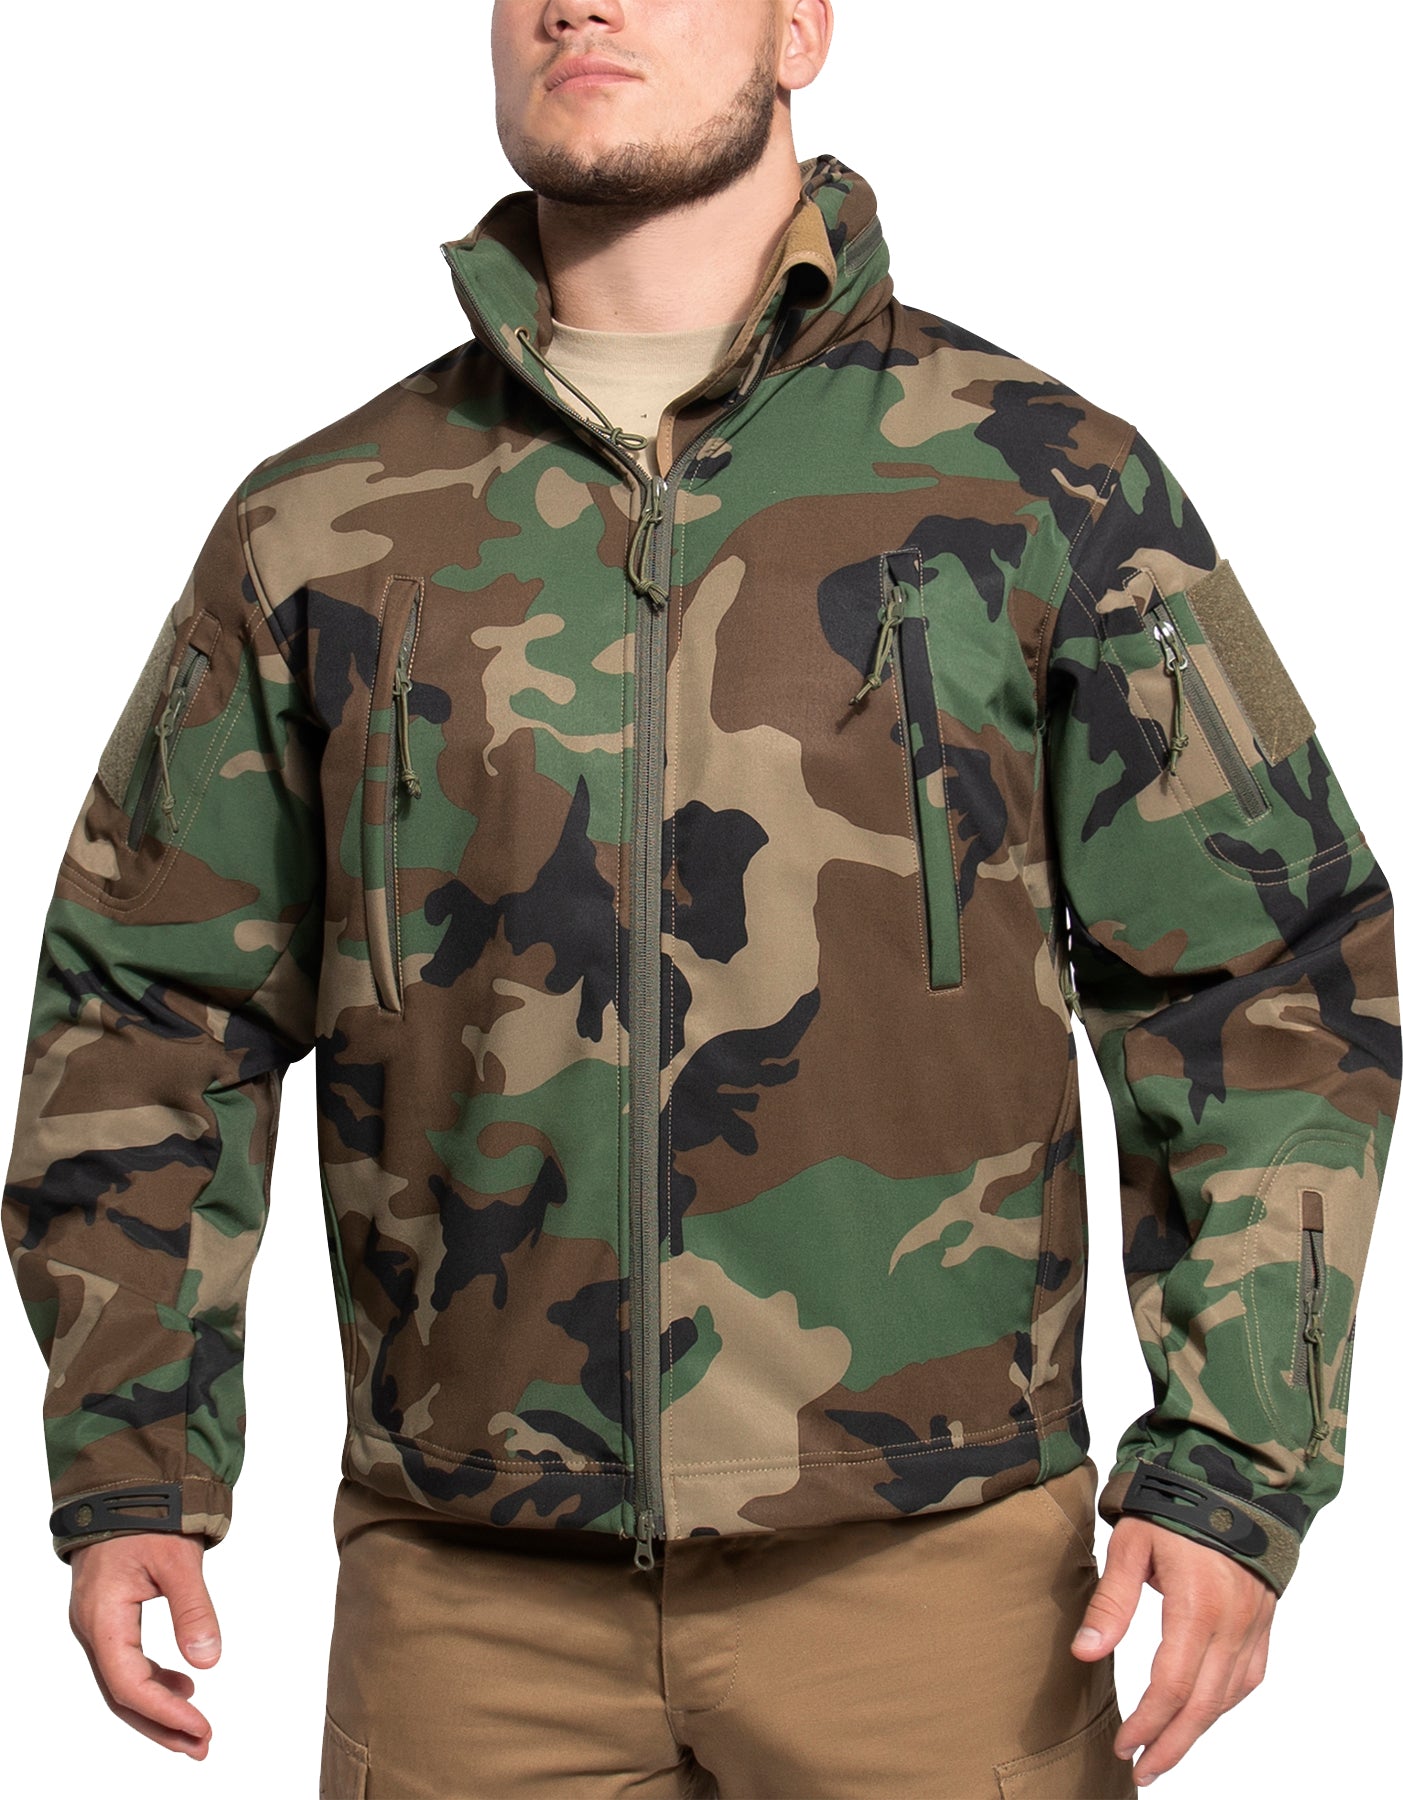 Woodland Camo - Concealed Carry Soft Shell Jacket